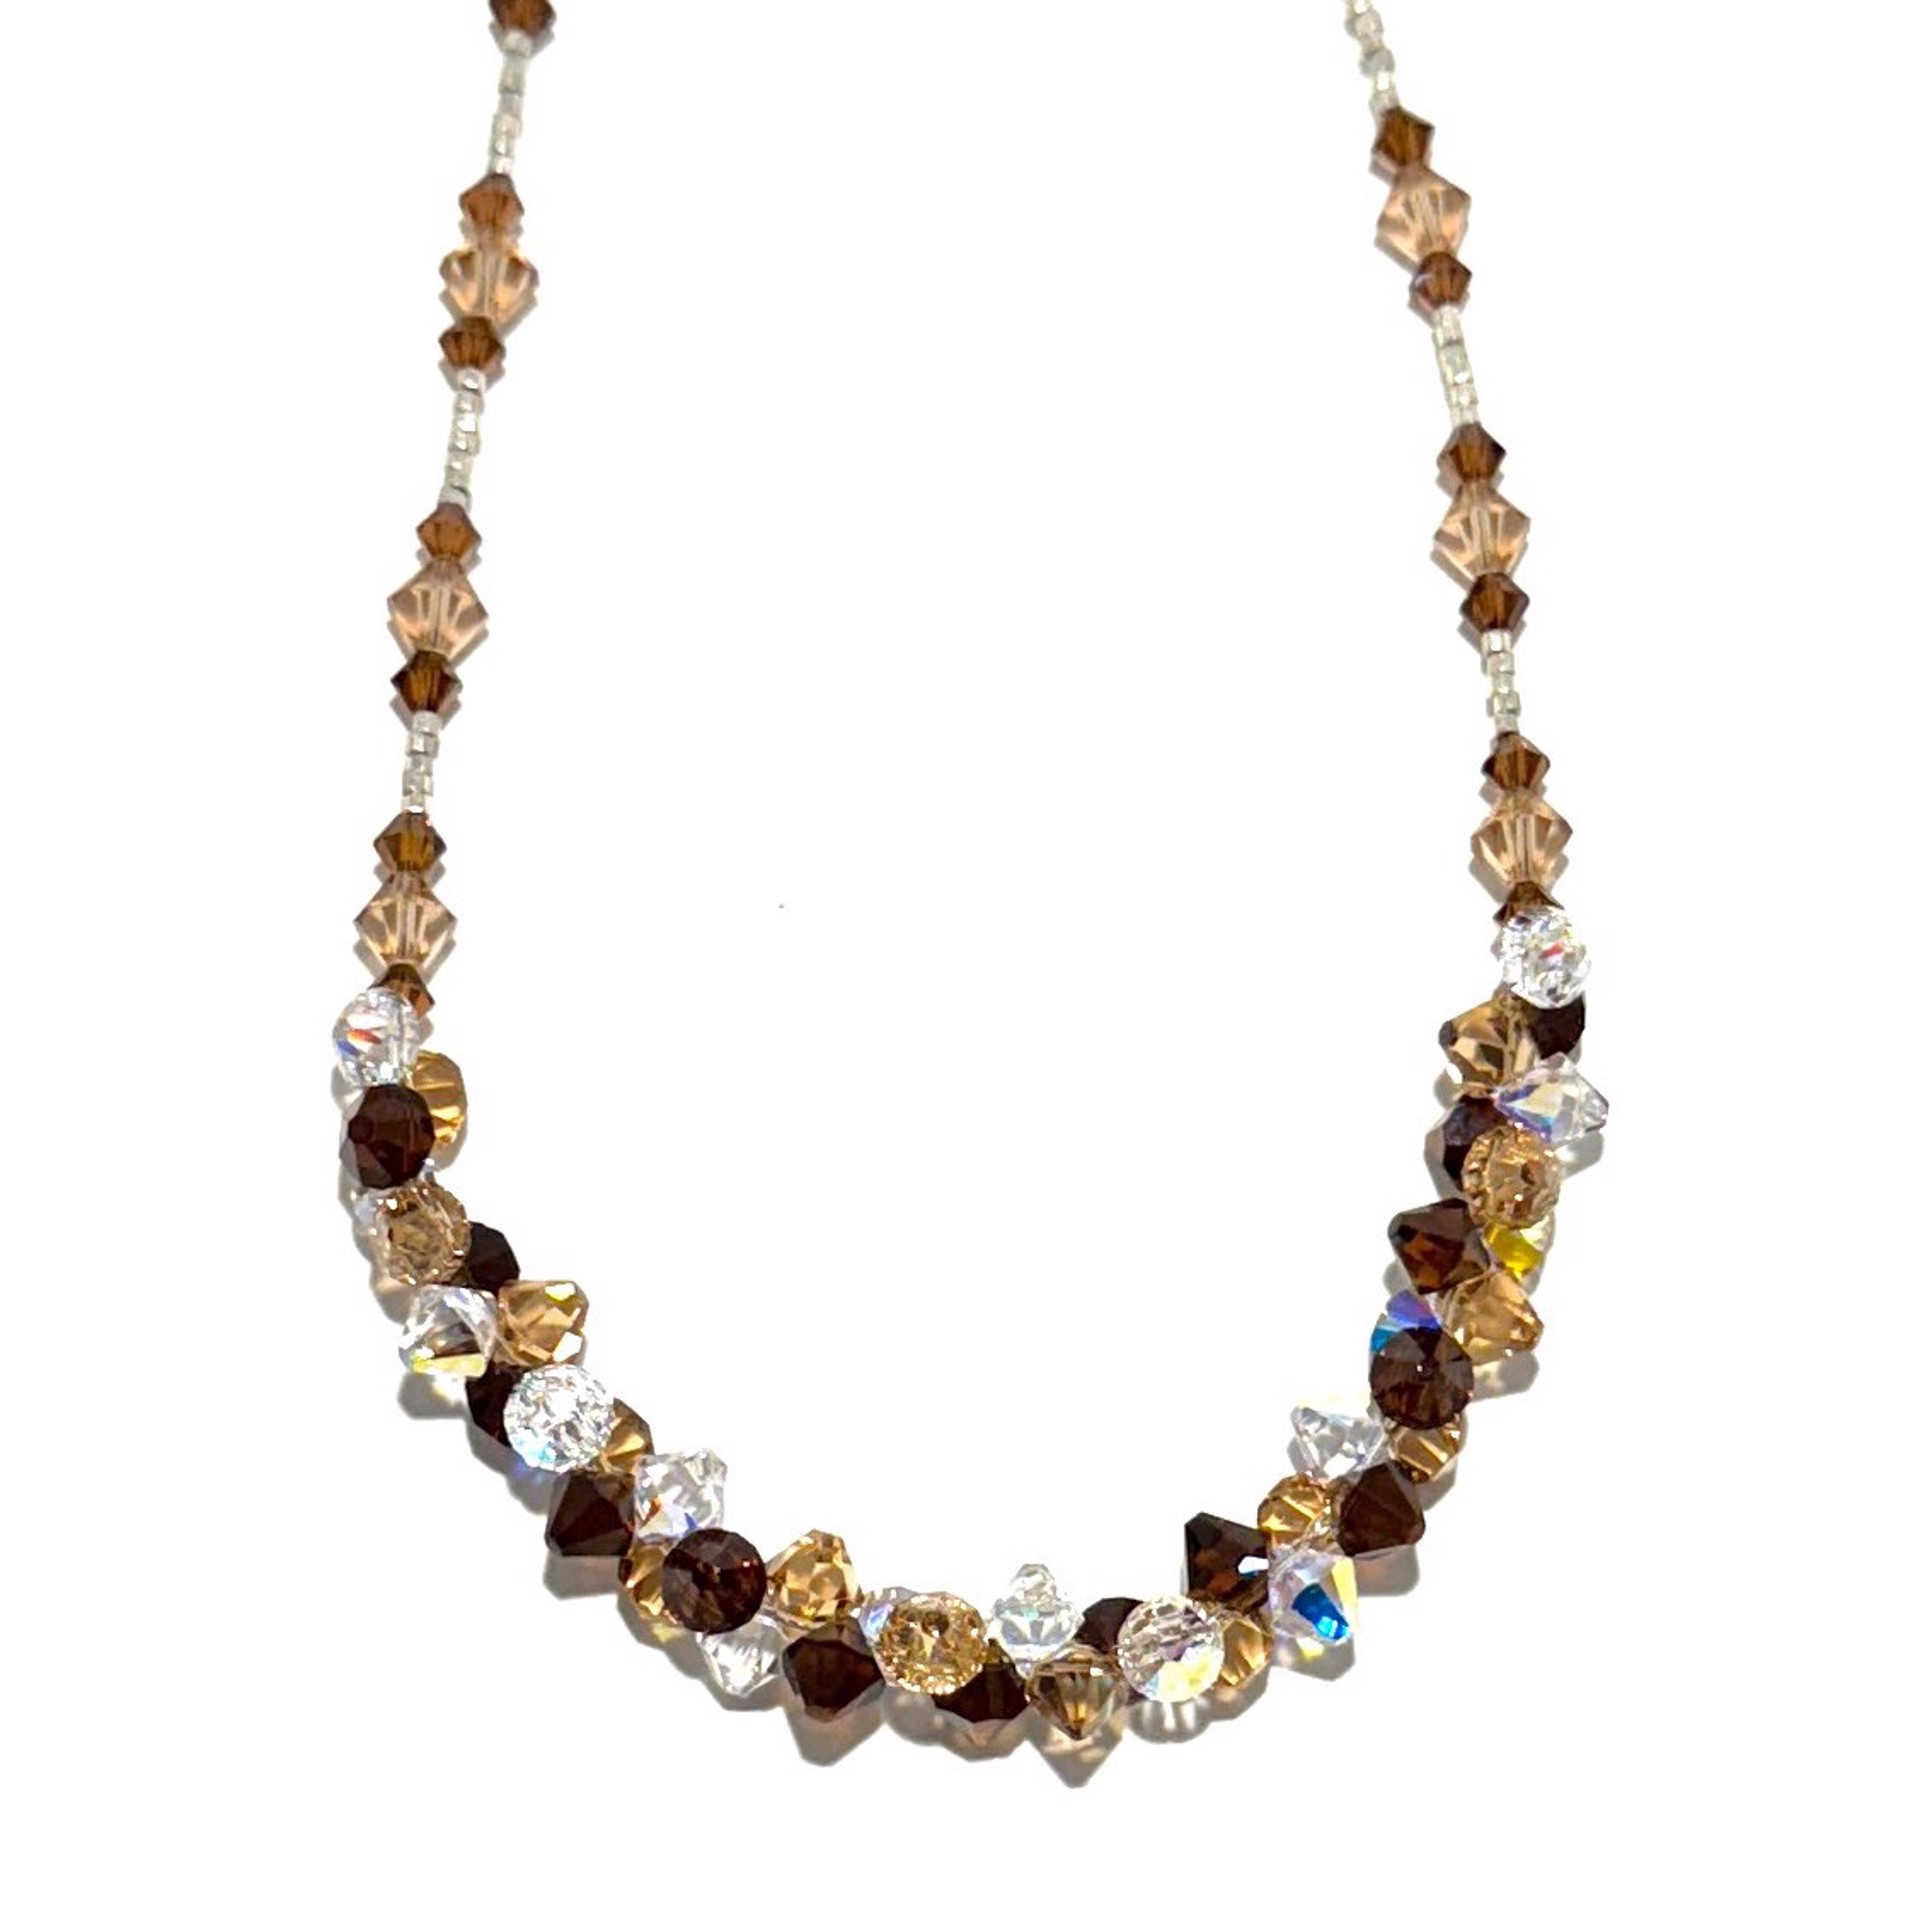 Babe in Shades of Brown Necklace SHOSH23-43 by Shoshannah Weinisch